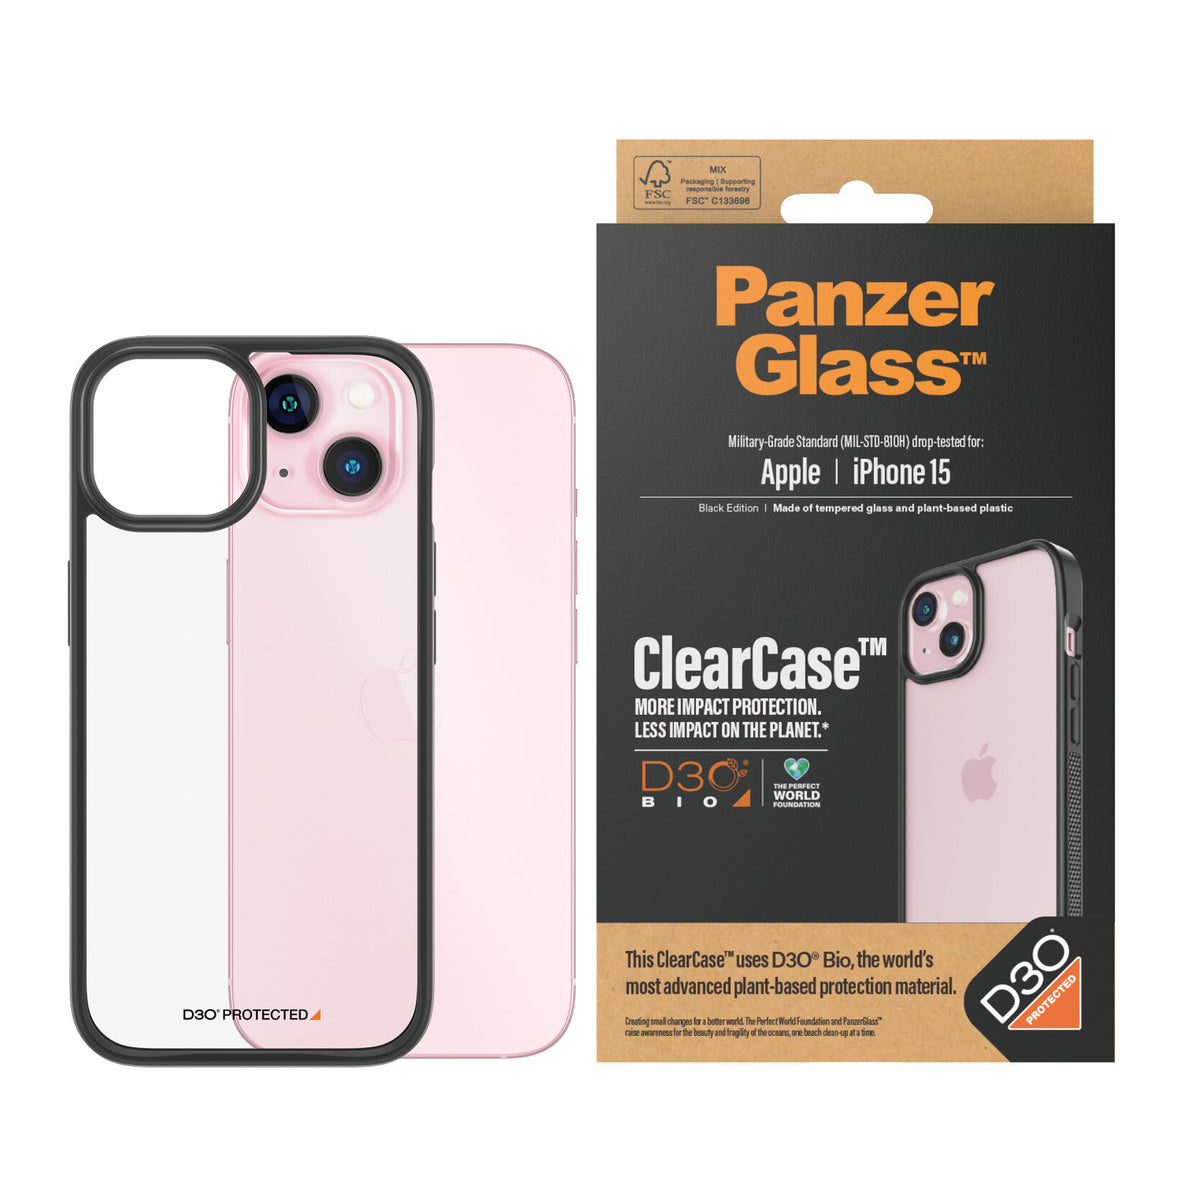 PanzerGlass ® ClearCase with D3O for iPhone 15 in Black